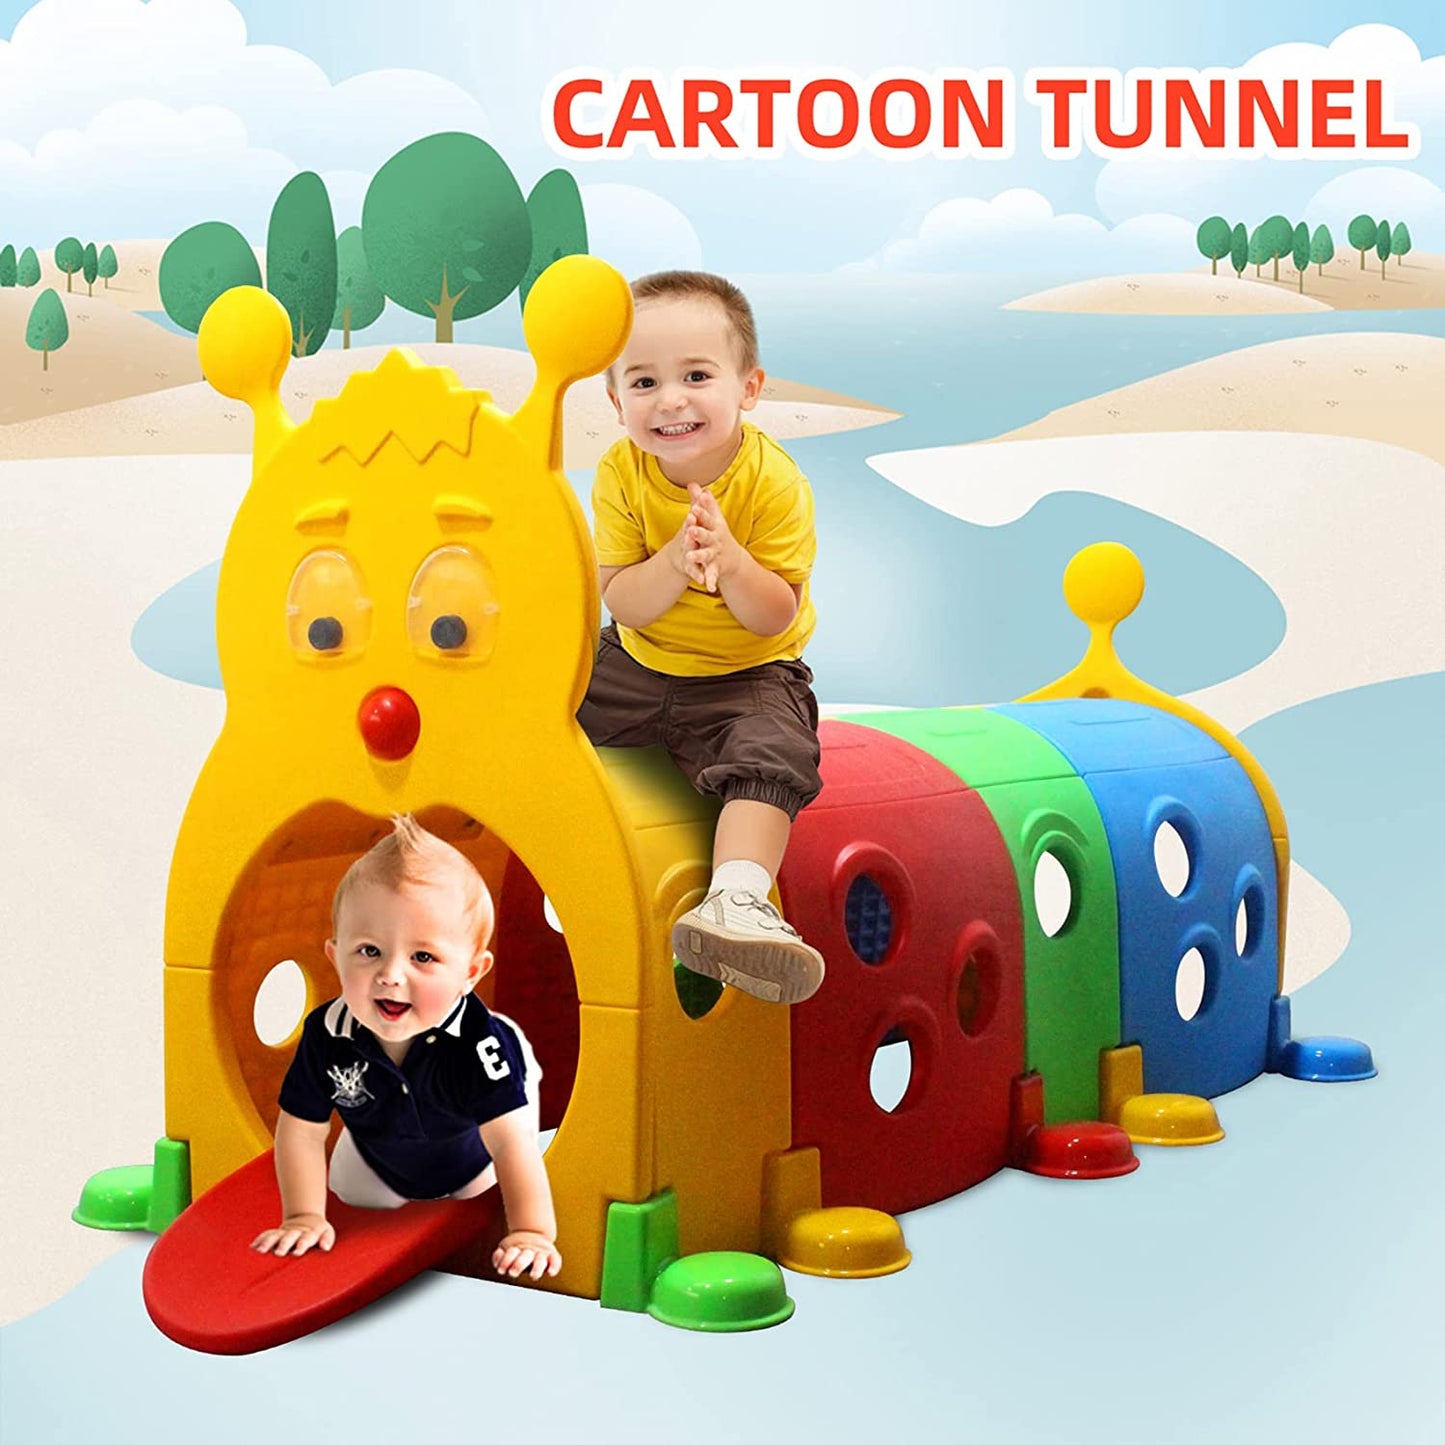 UNICOO - Caterpillar Tunnel for Kids Climb-N-Crawl Toy Indoor & Outdoor Toddler Play Structure 4 Sections